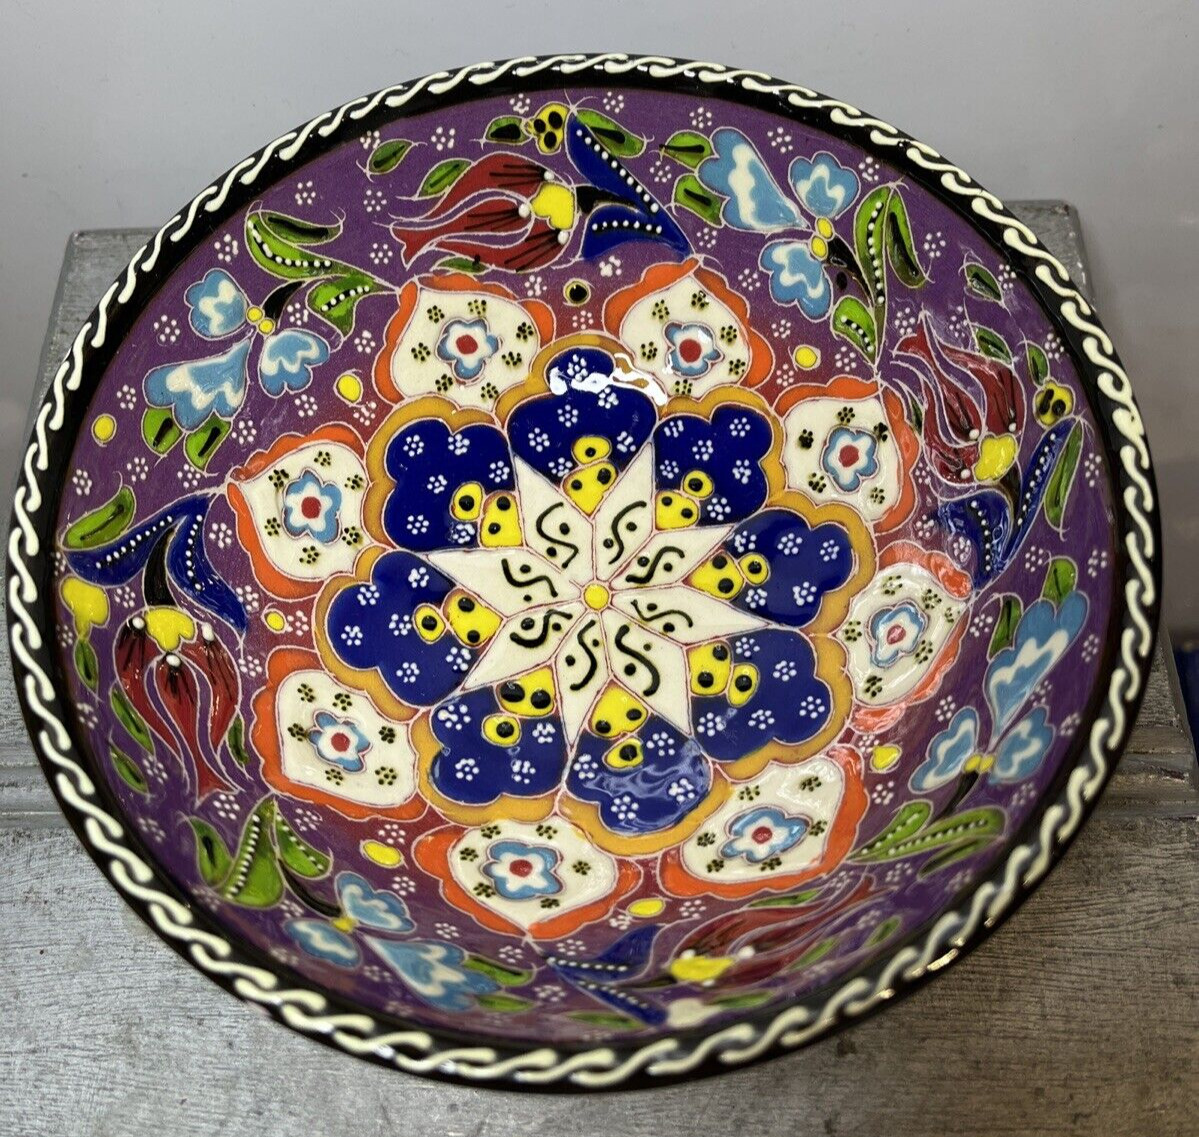 Artistic Bowl Hand Made Ceramic Hand Decorated Vintage Collectable Bowl Plate